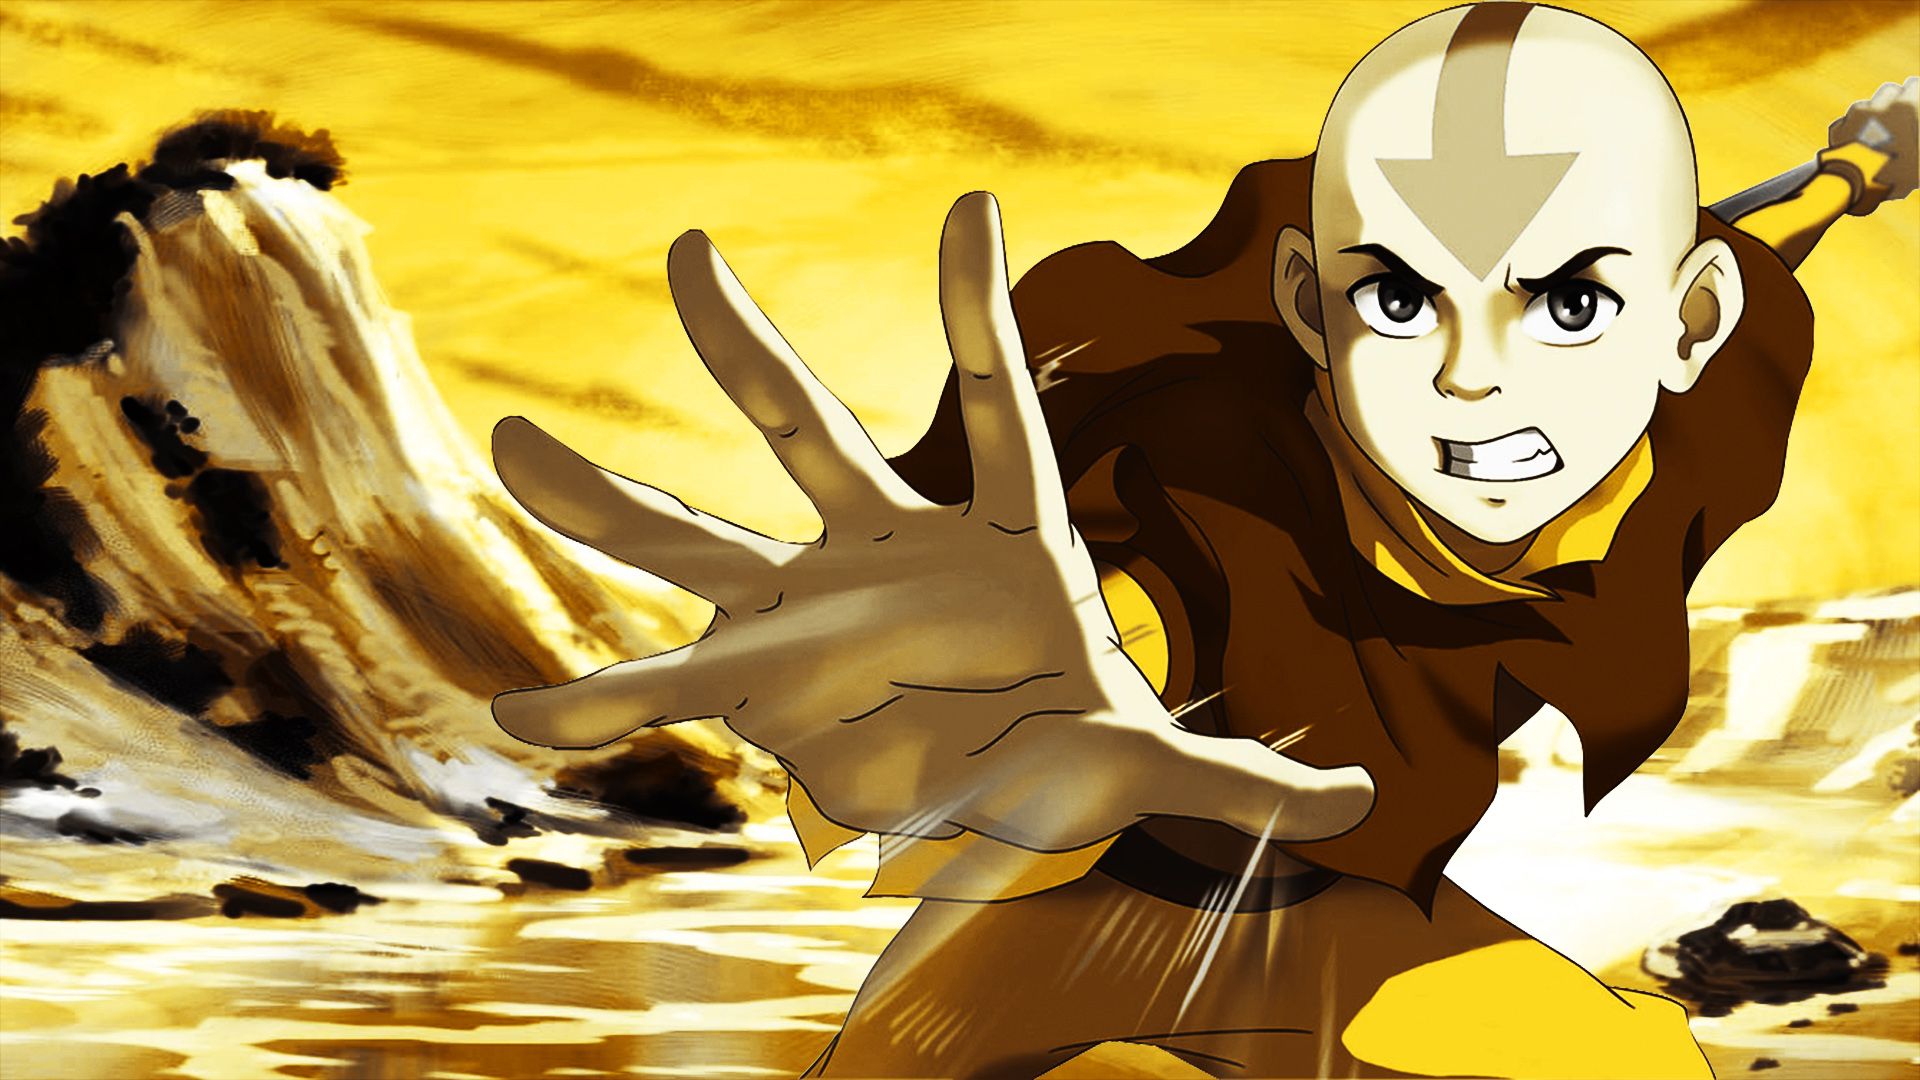 Avatar the legend of aang wallpaper 1920x1080 by dannilowGFX on ...